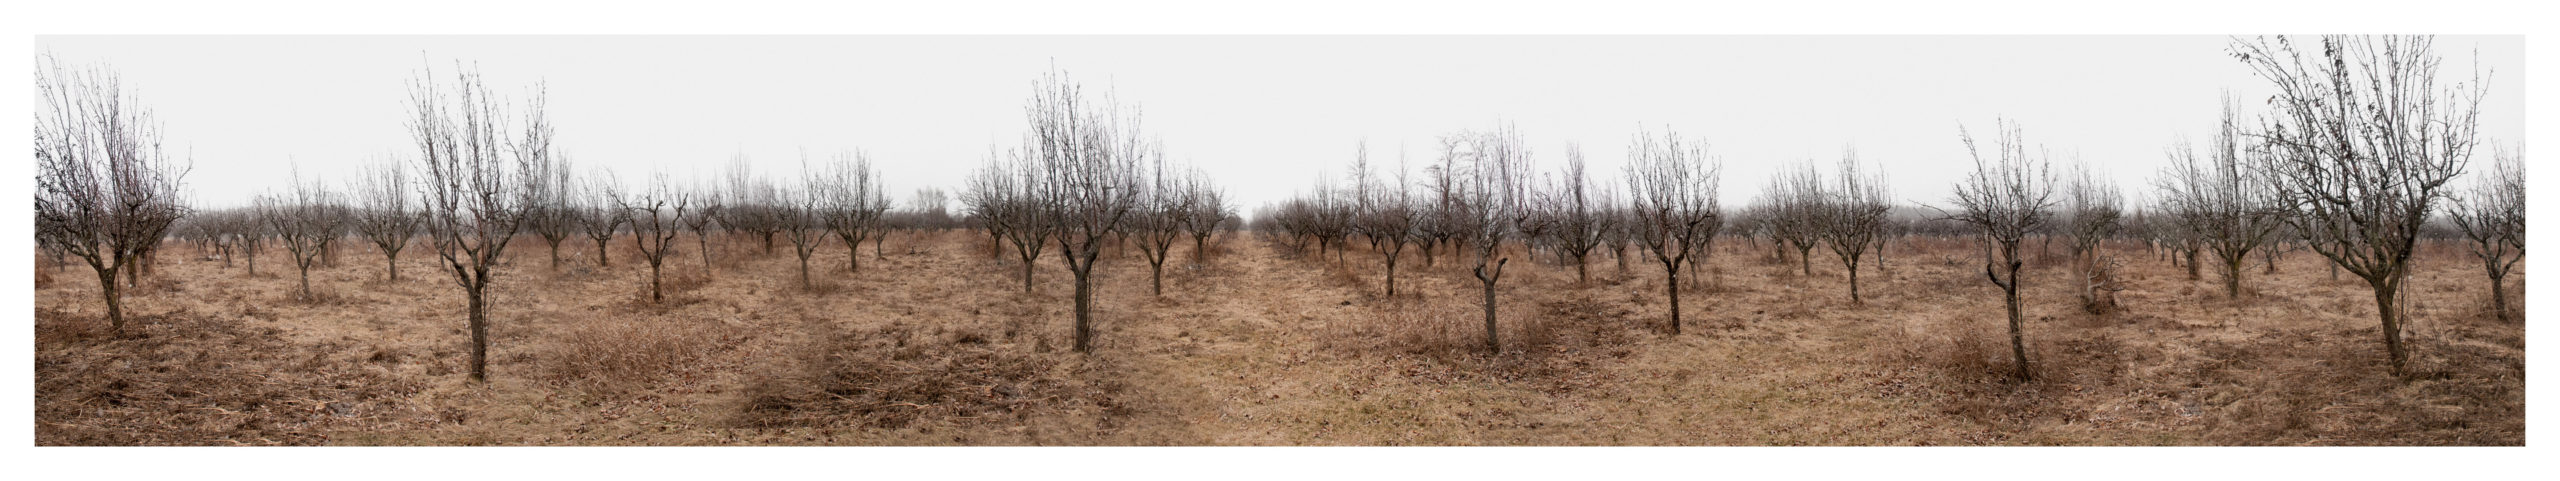 Demise of Pear Orchard 2017